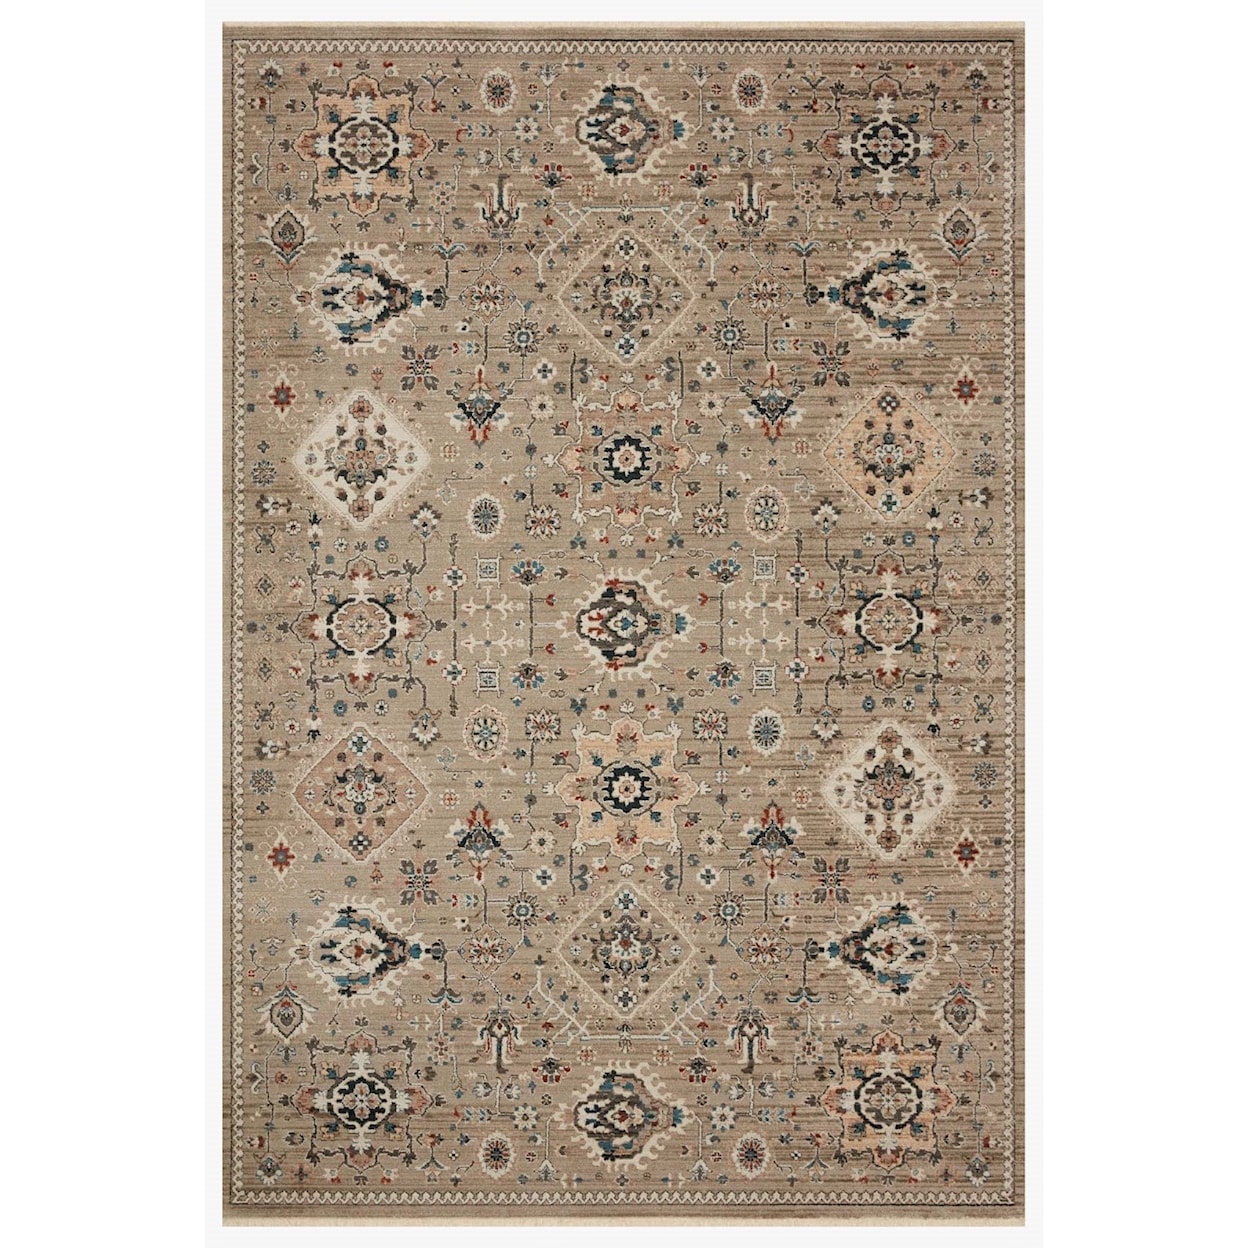 Reeds Rugs Leigh 11'6" x 15'7" Dove / Multi Rug